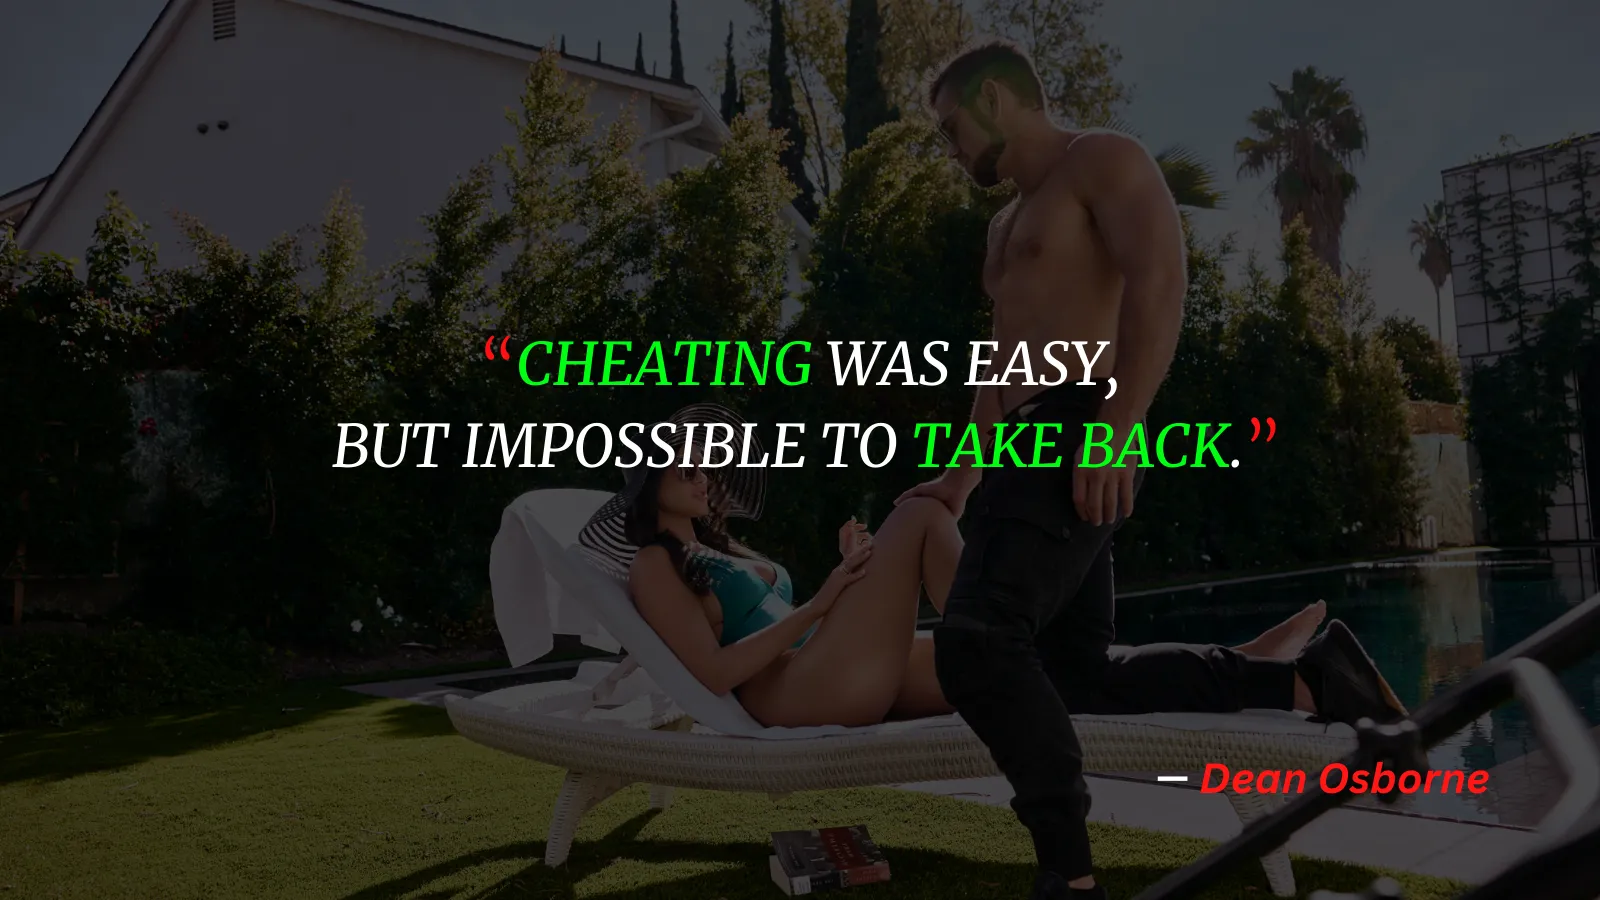 "Cheating Was Easy, But Impossible To Take Back."